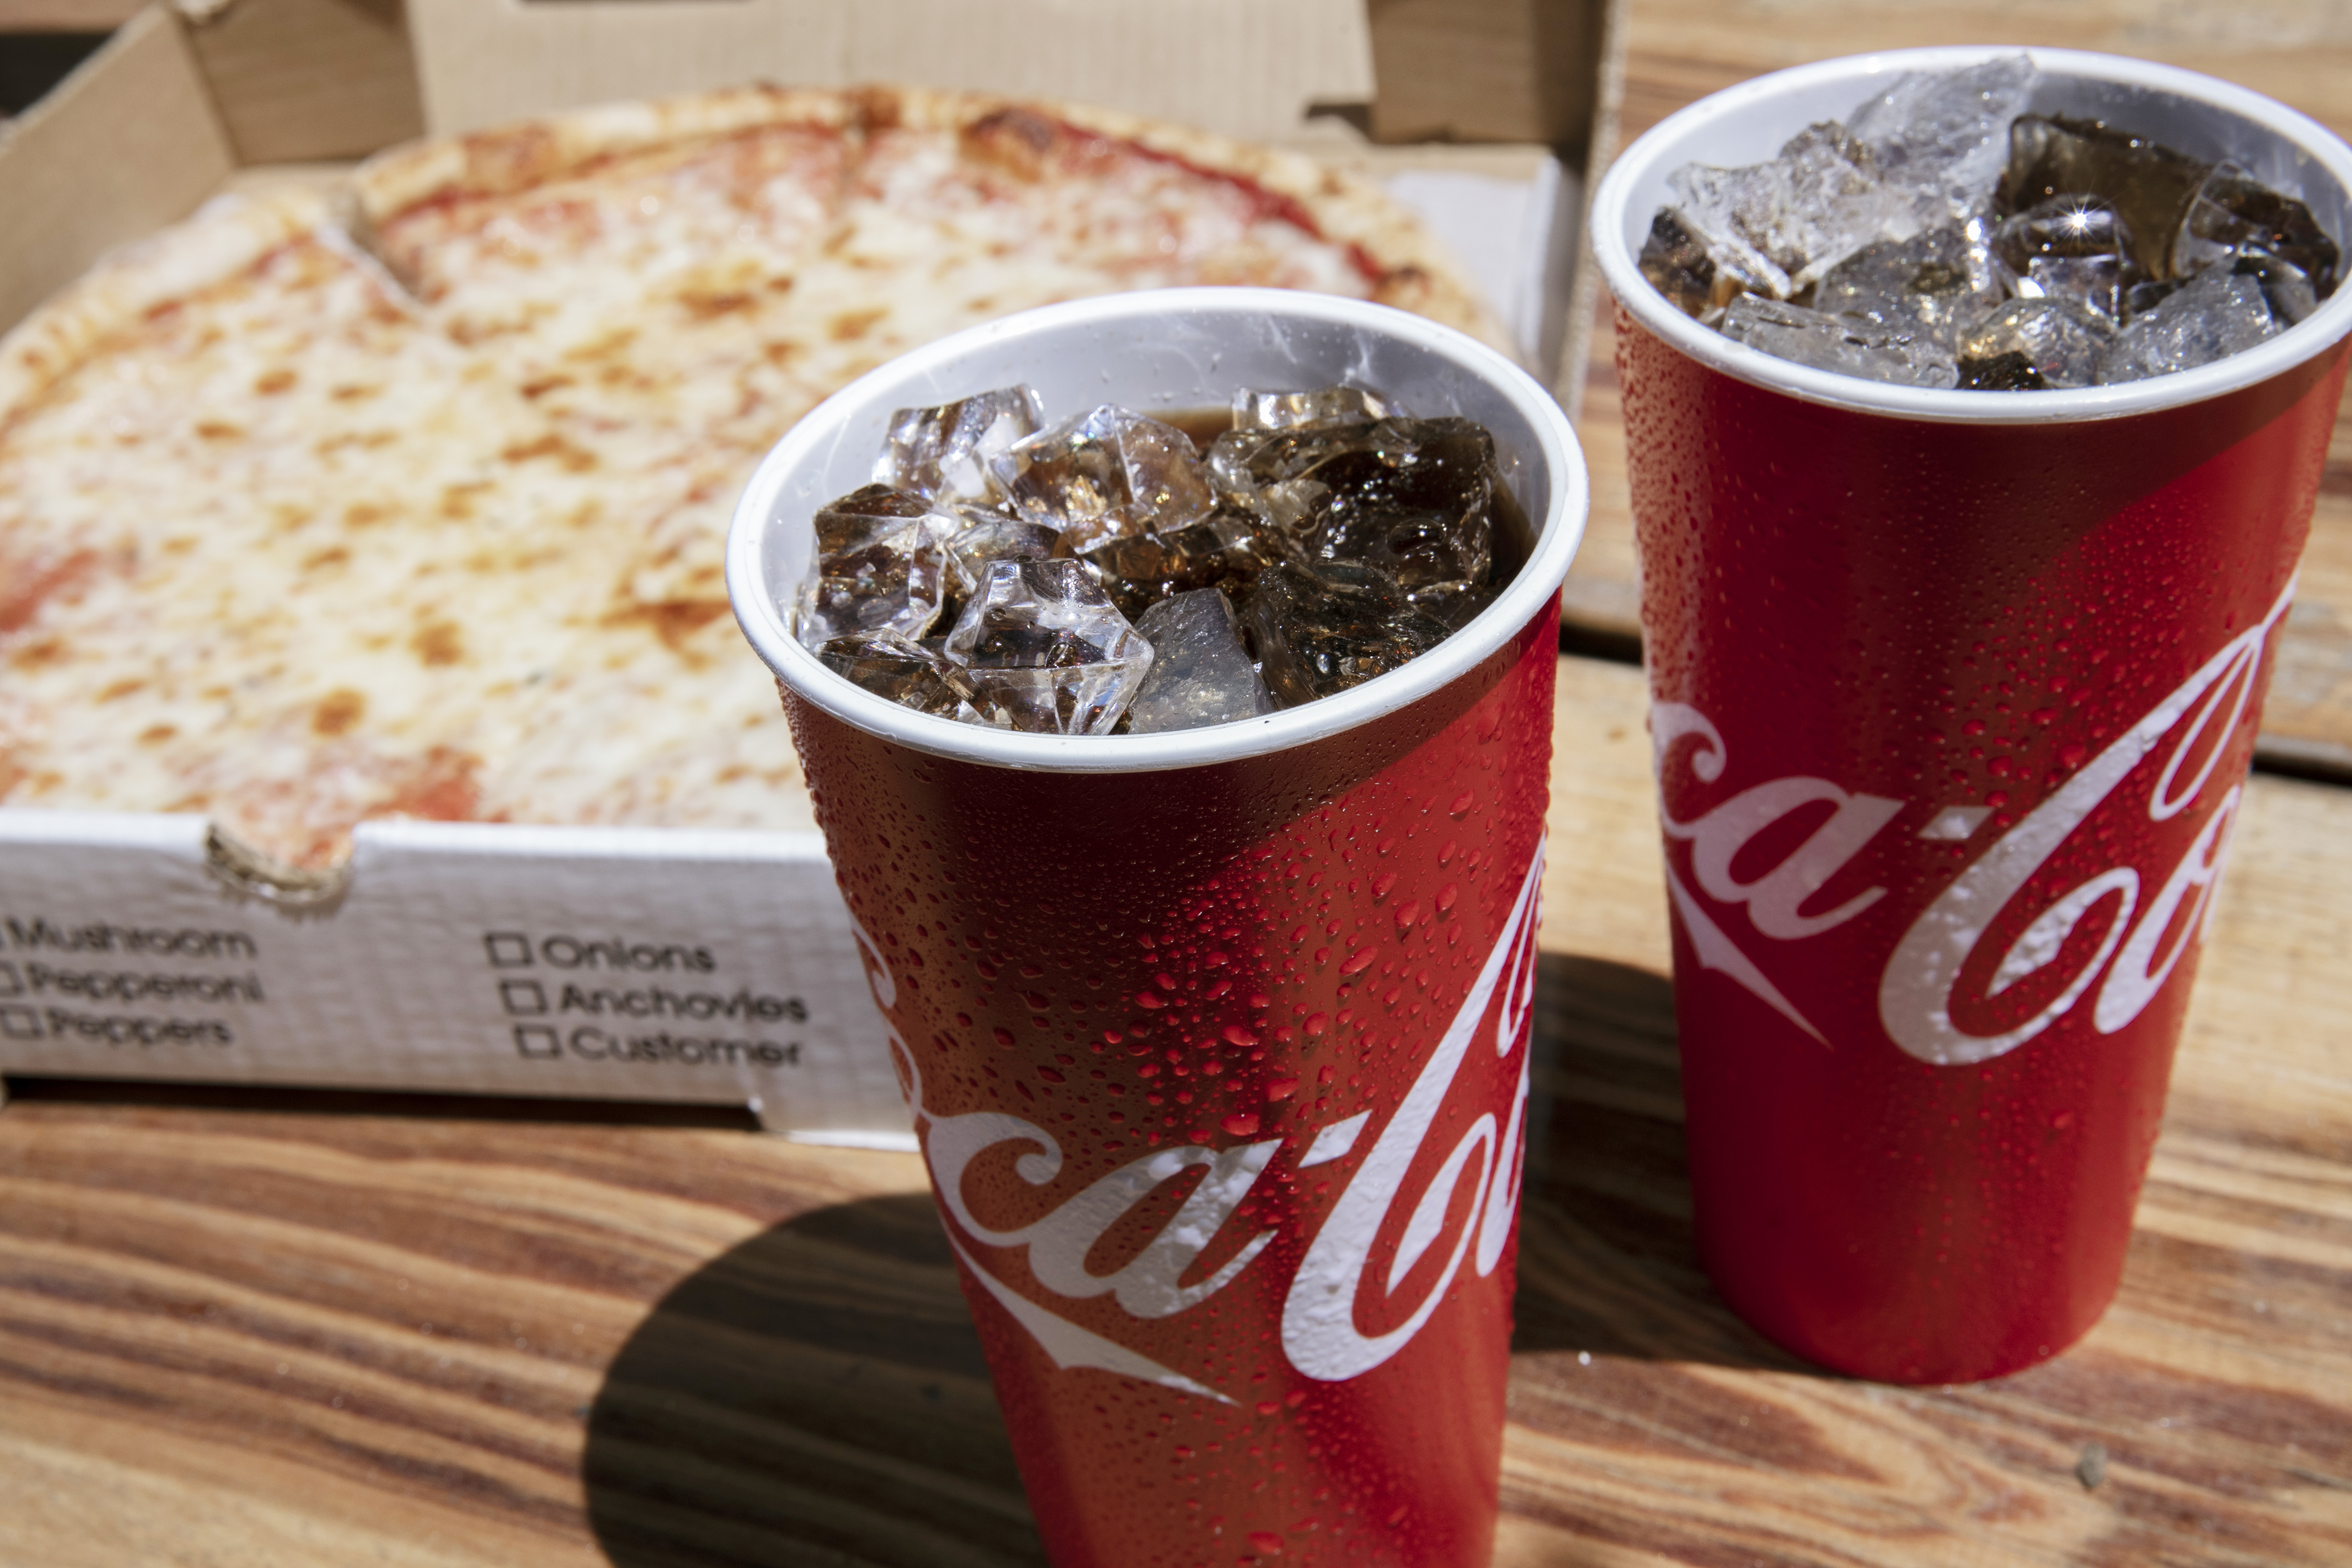 A cheese pizza in a delivery box, plus two paper cups of Coca-Cola.